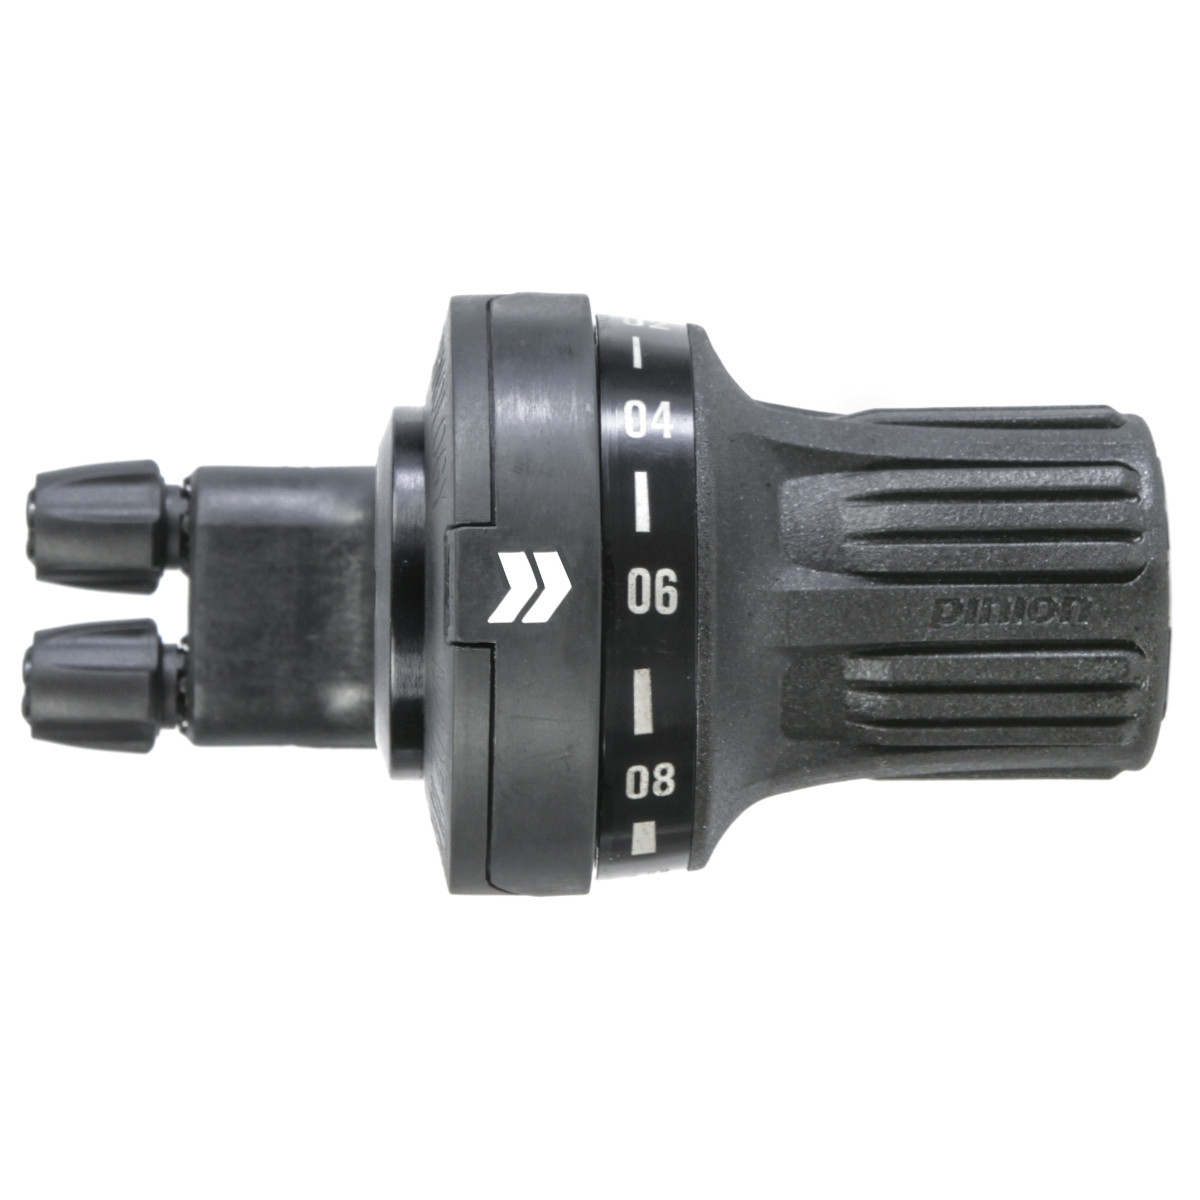 Productfoto van Pinion DS2.12 Rotary Shifter - P5561